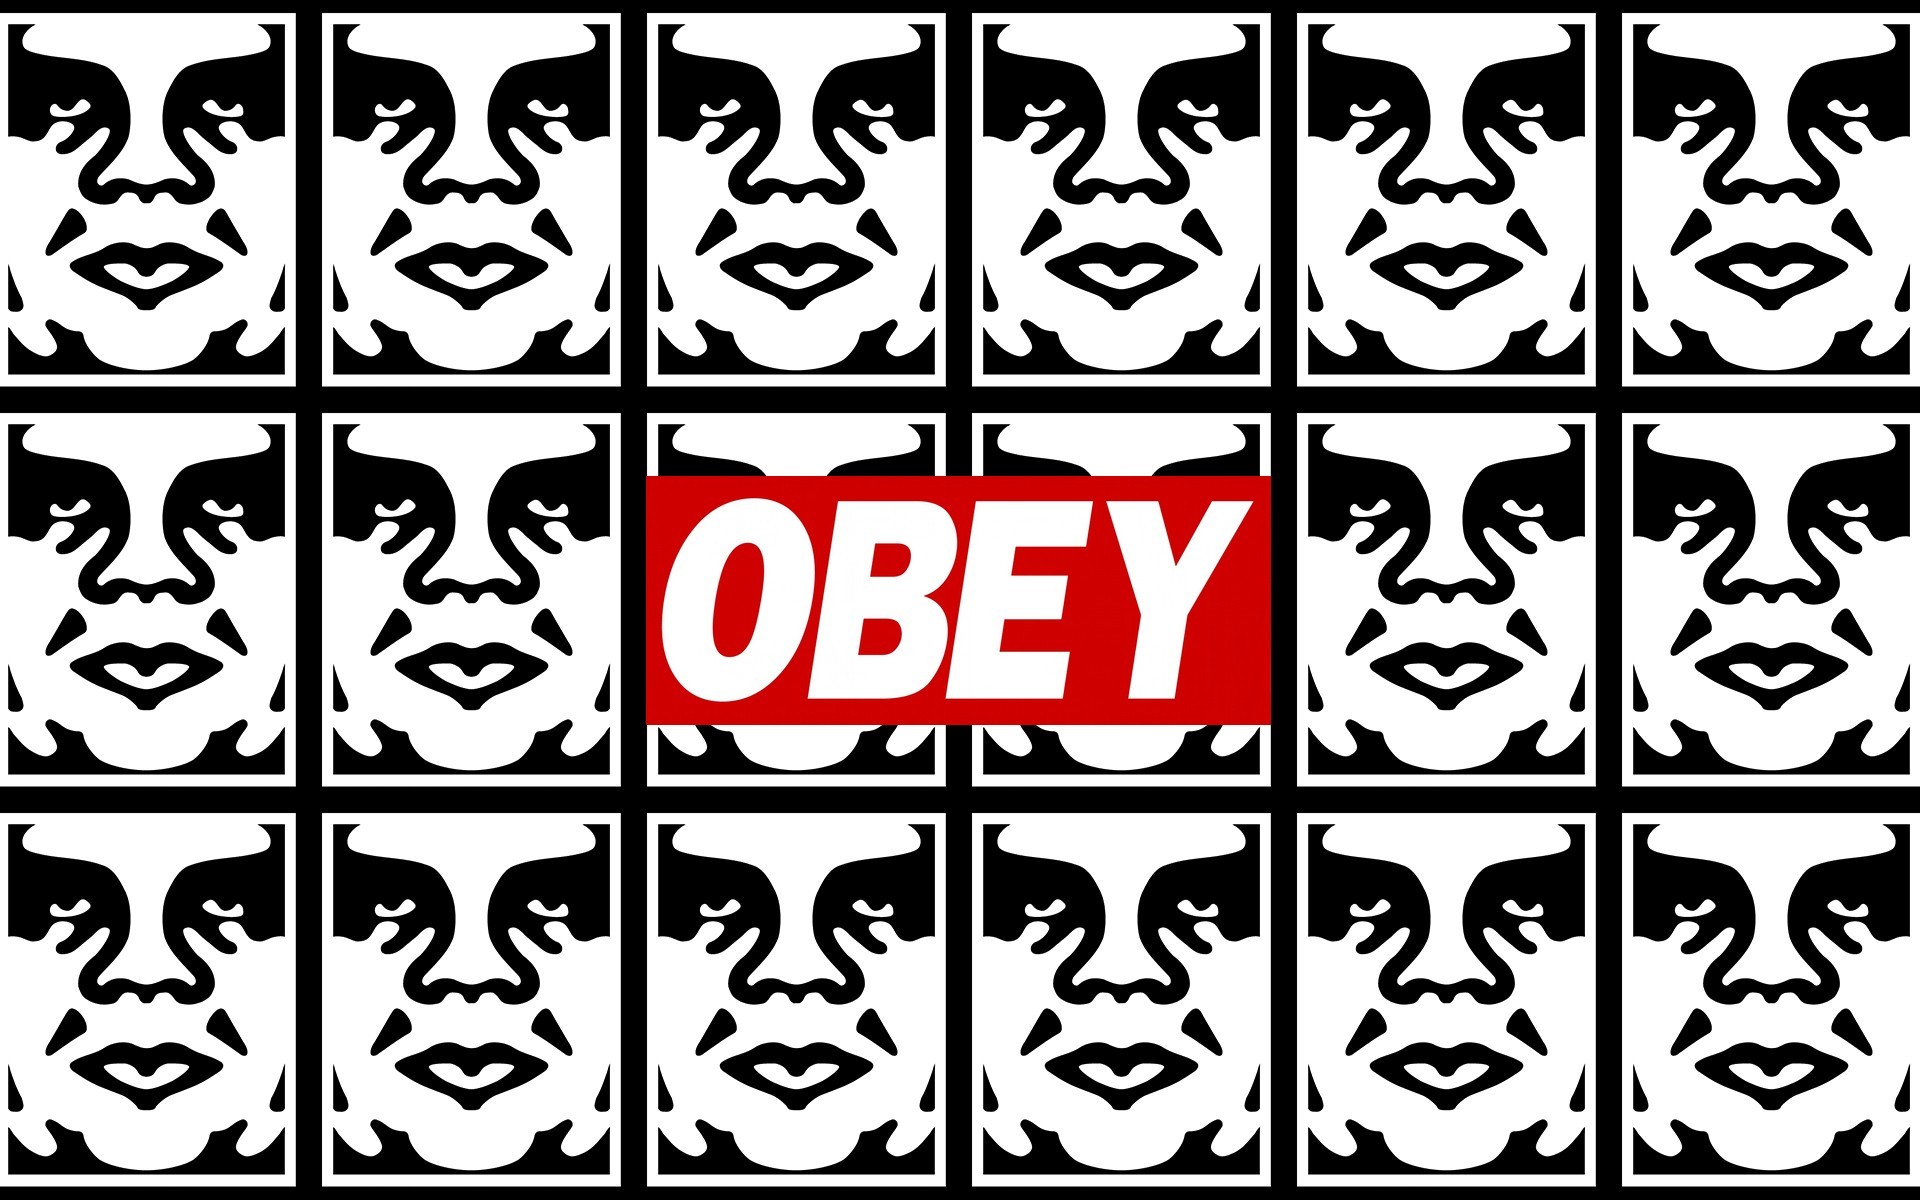 Obey HD Wallpaper (70+ images)